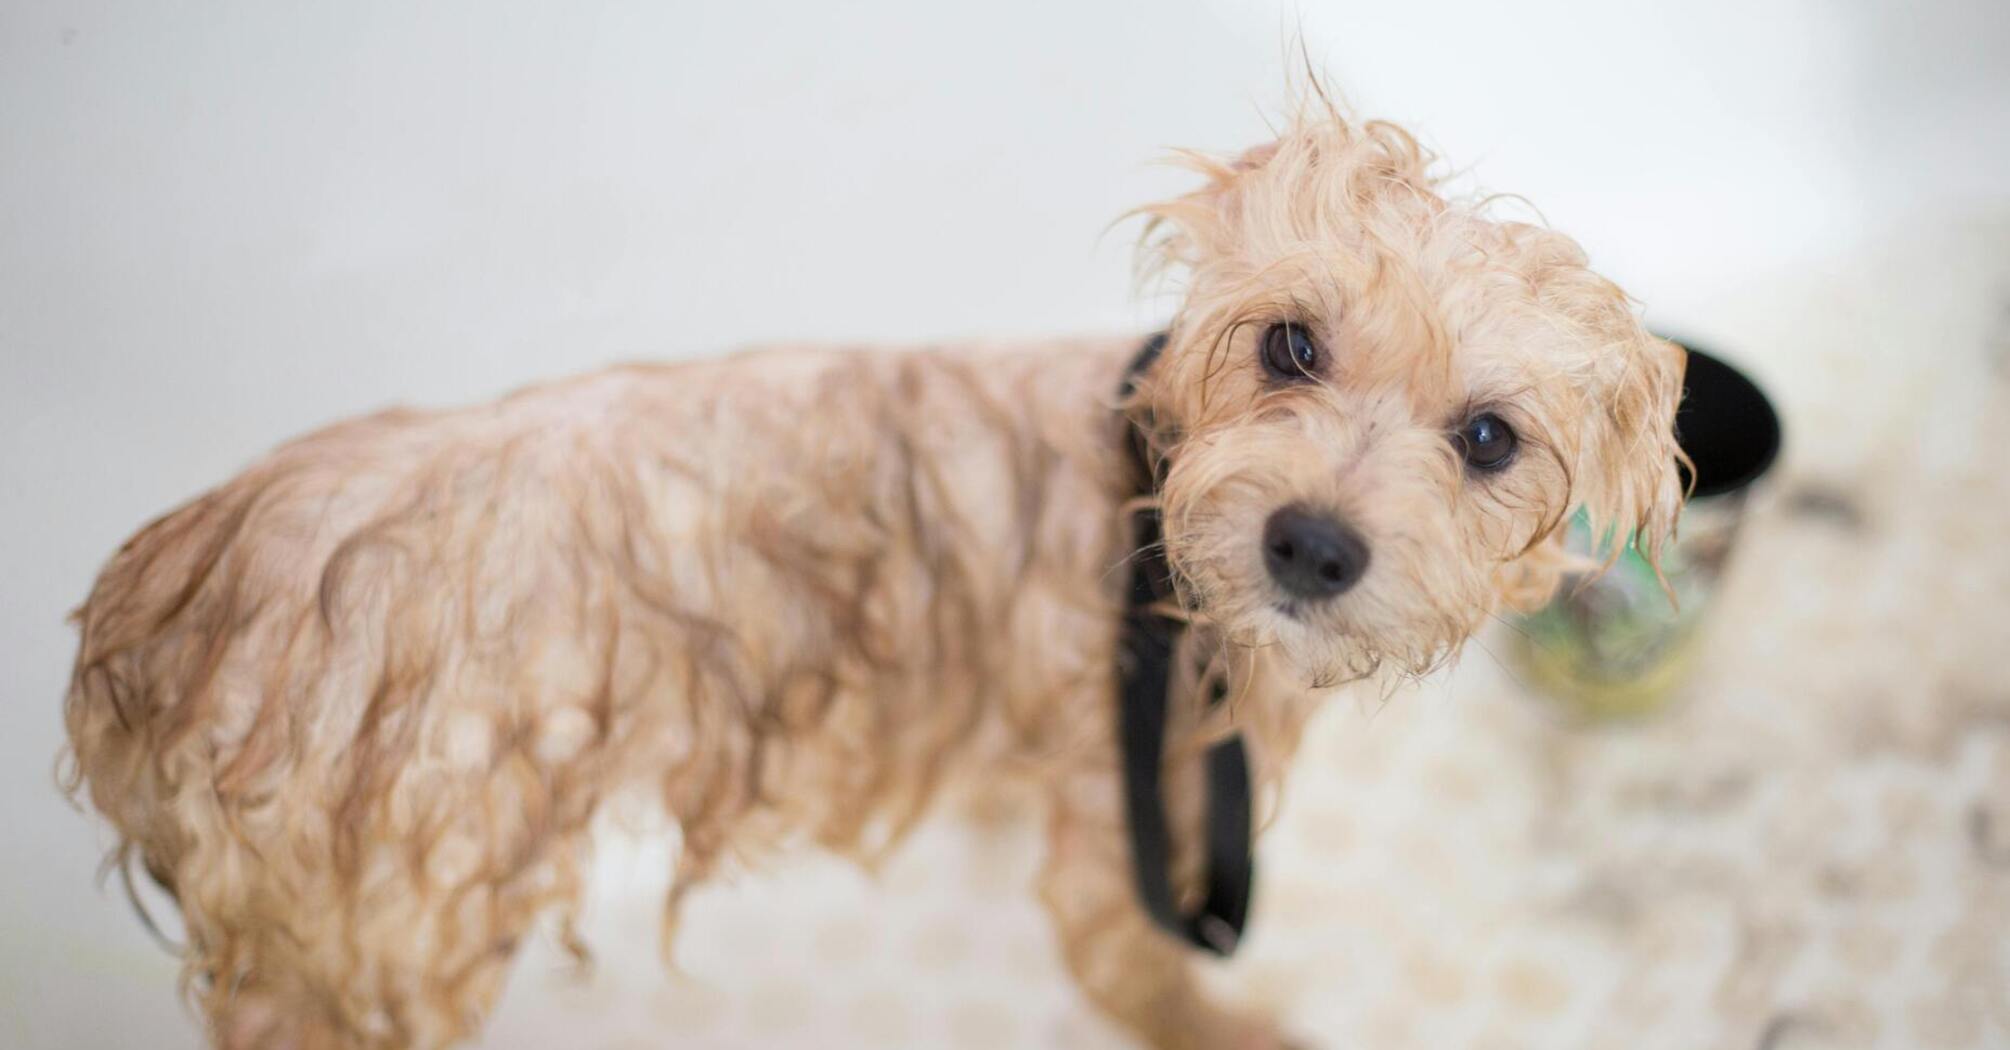 Home grooming: Pros and cons you should know about pet grooming